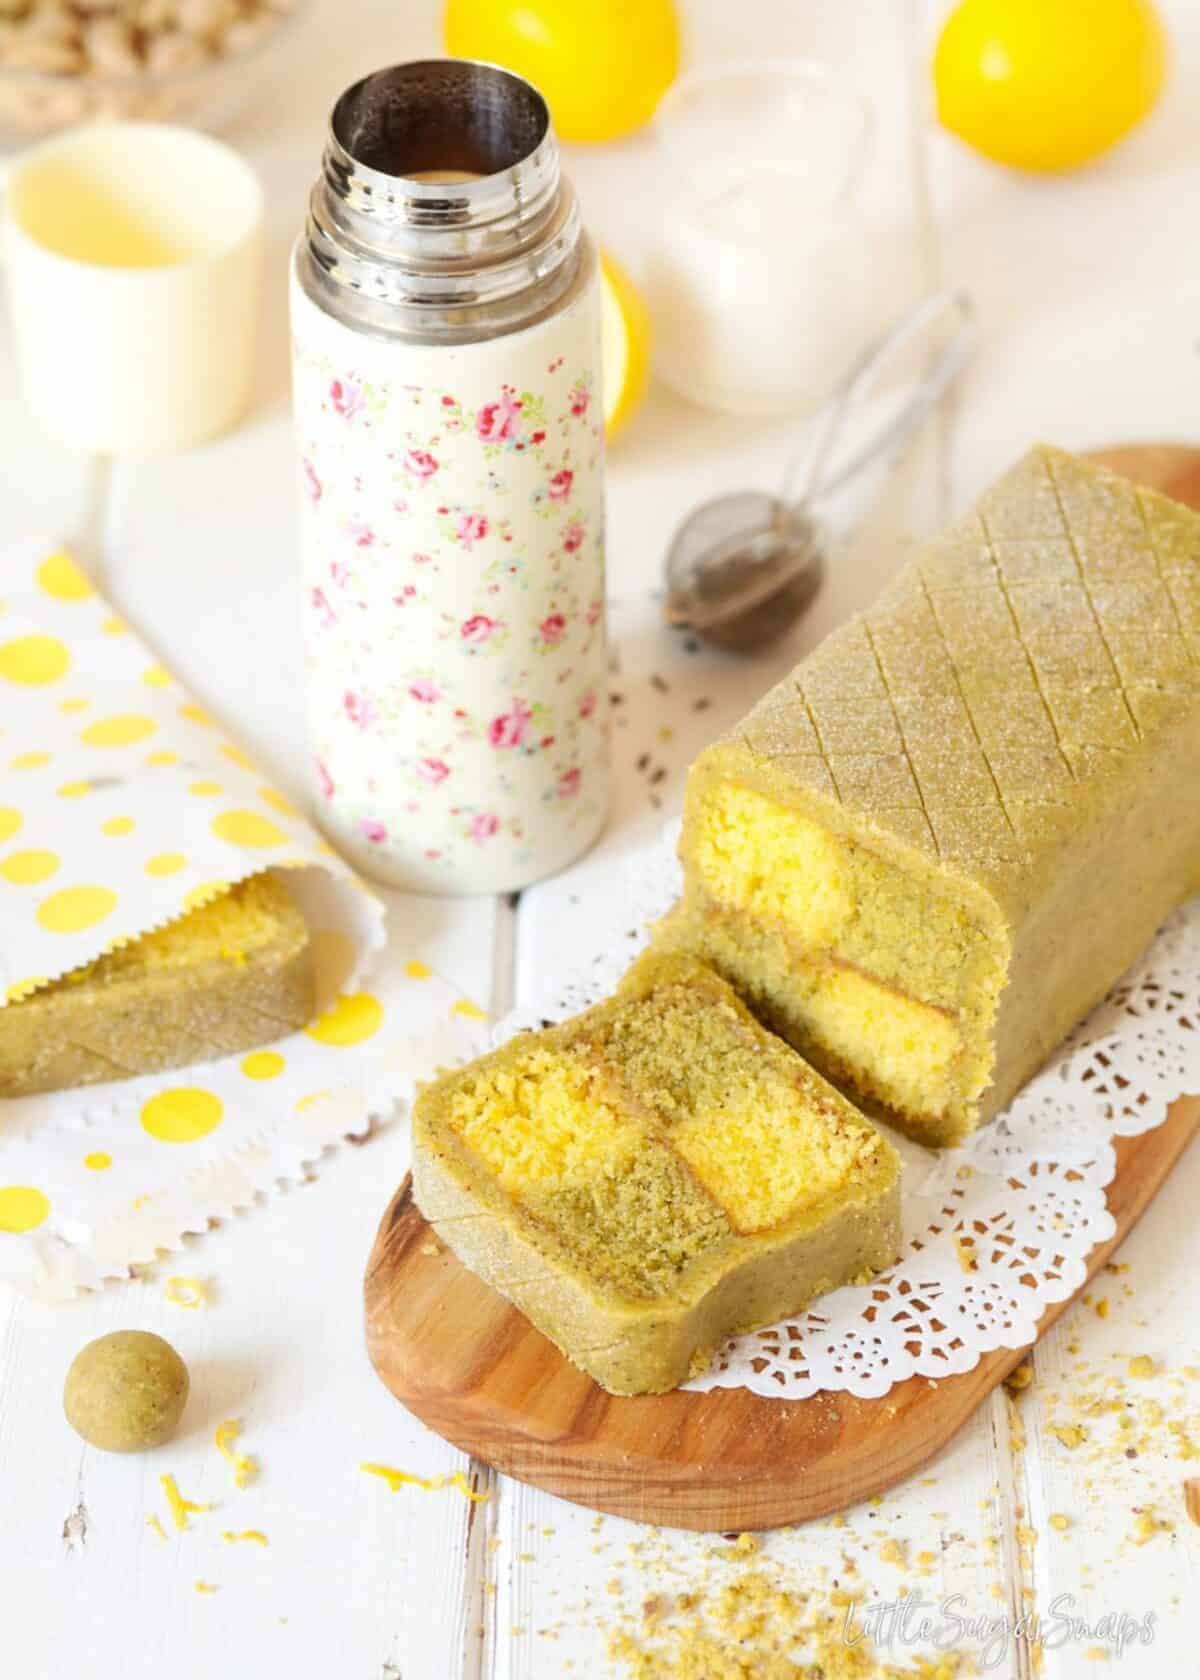 A straight view of the Pistachio Lemon Battenberg Cake with Pistachio Marzipan and pistachio and lemons in the background.